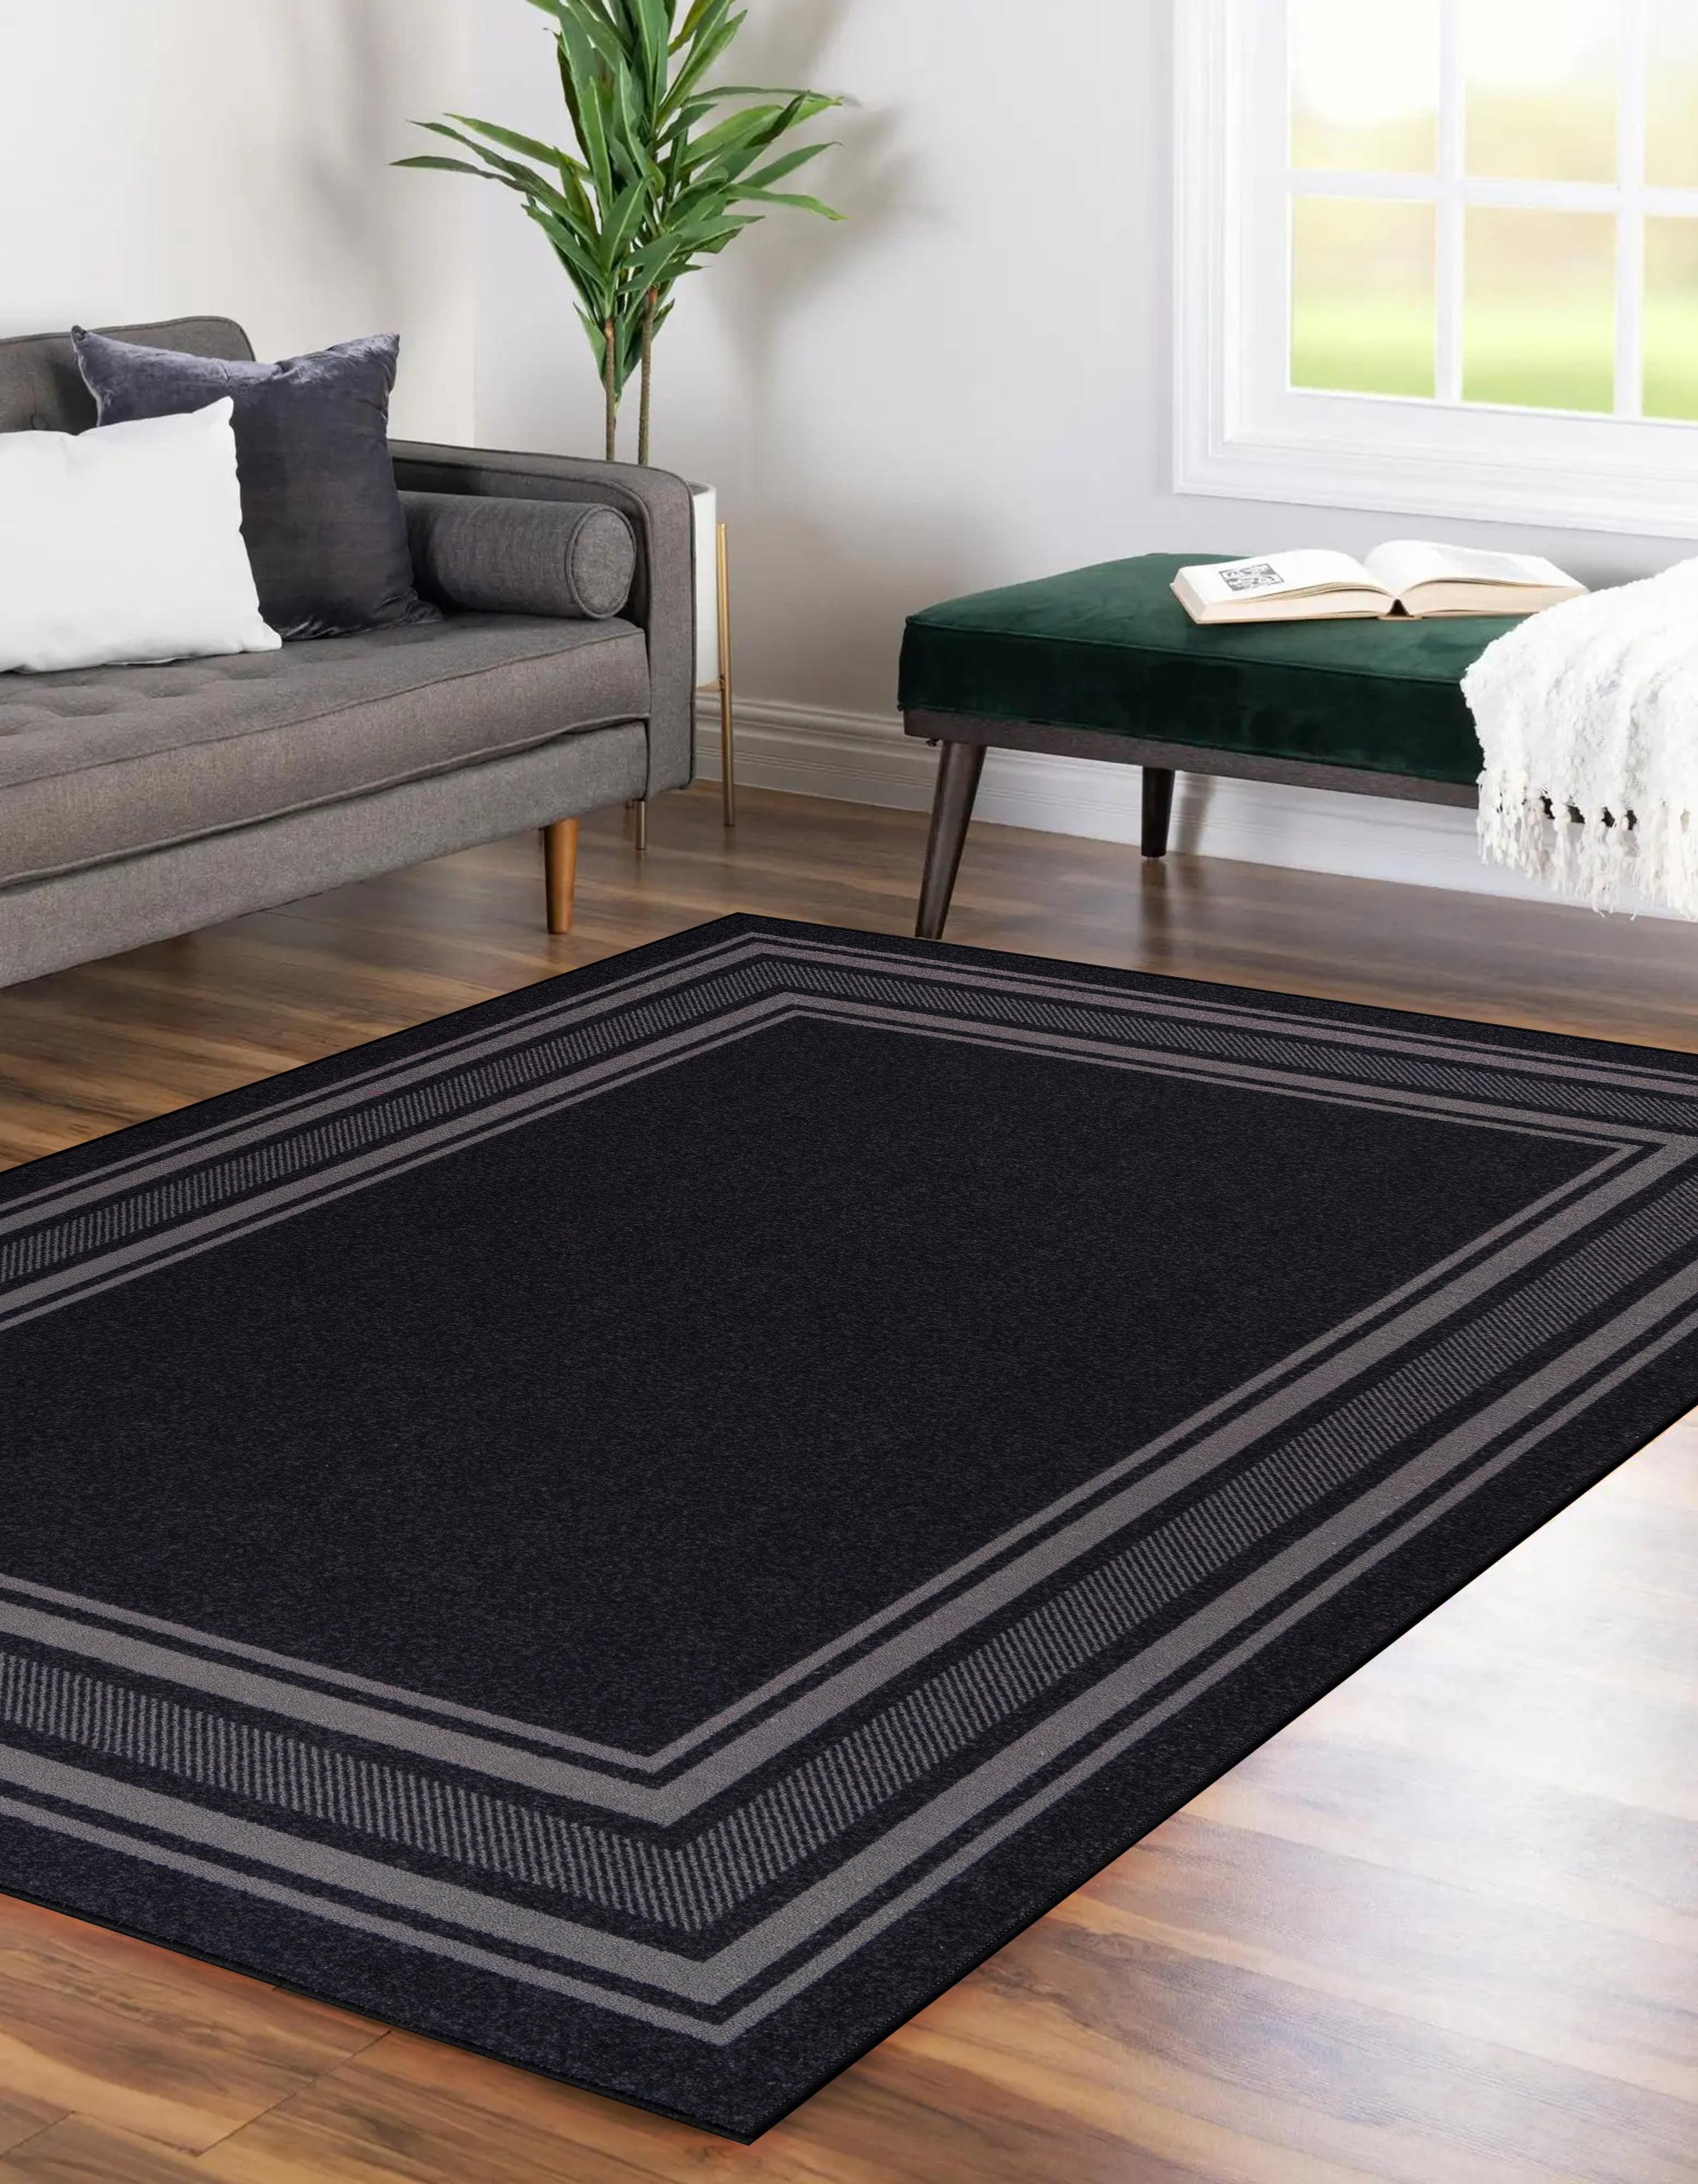 Beverly Rug Diego Solid Brown 20 in. x 59 in. Non-Slip Rubber Back Runner Rug